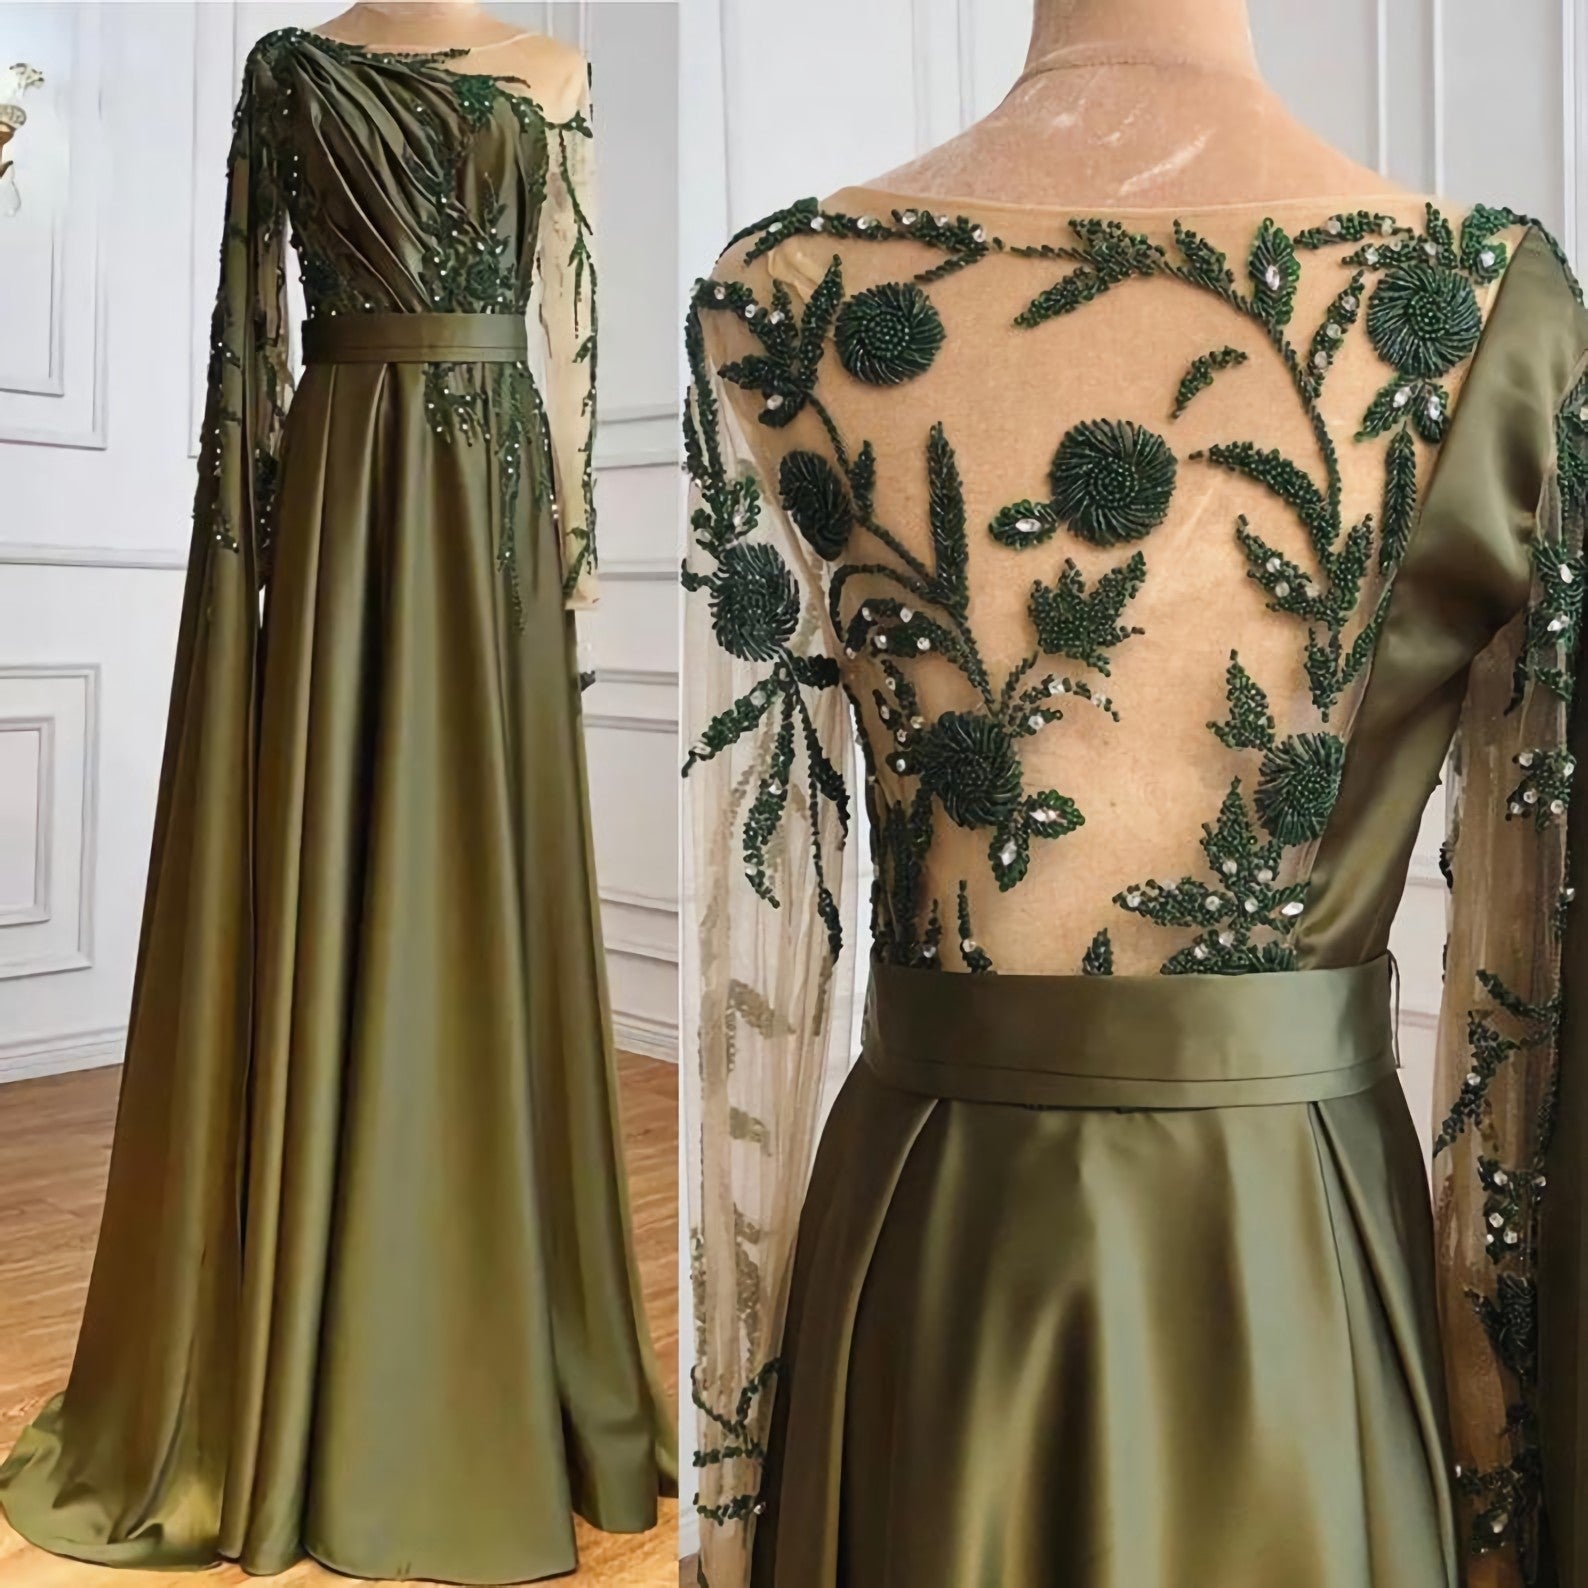 Party Dresses For Christmas Party, Luxury Olive Green Evening Moroccan Dress, Beading Sequined Formal Party Wear Gown Dubai Evening Dress